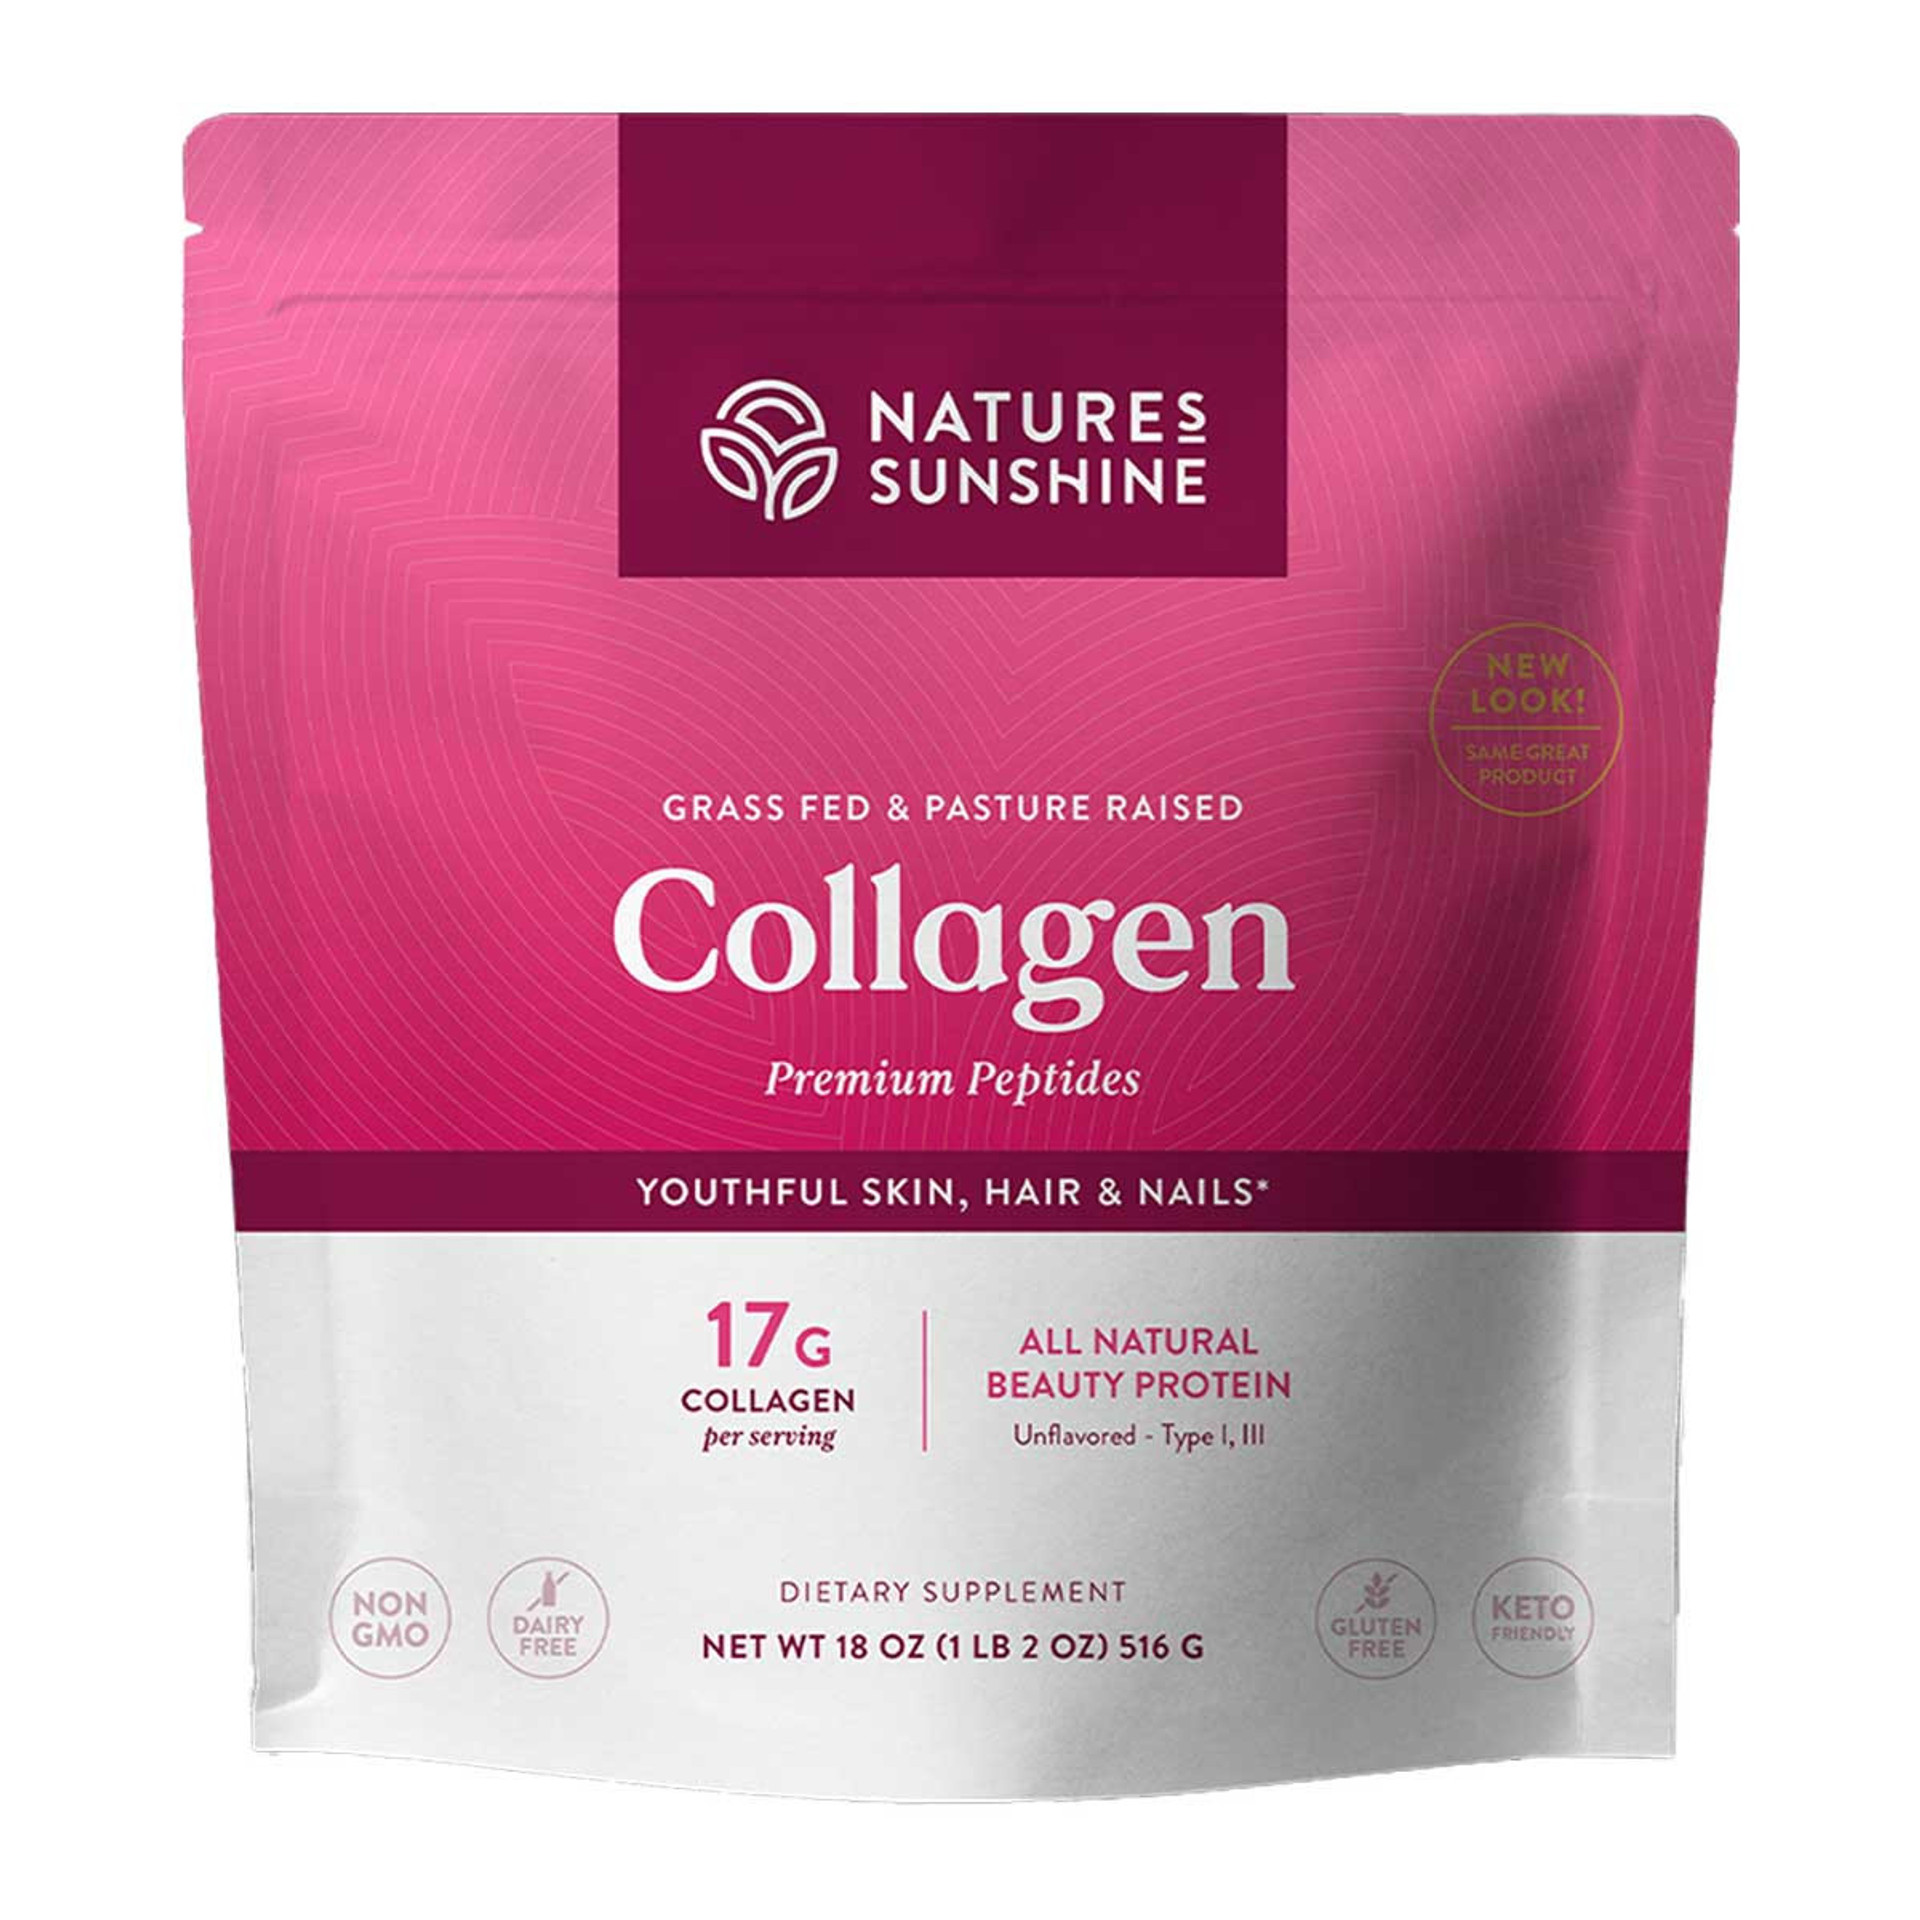 Buy Collagen by Nature's Sunshine I HealthPost NZ